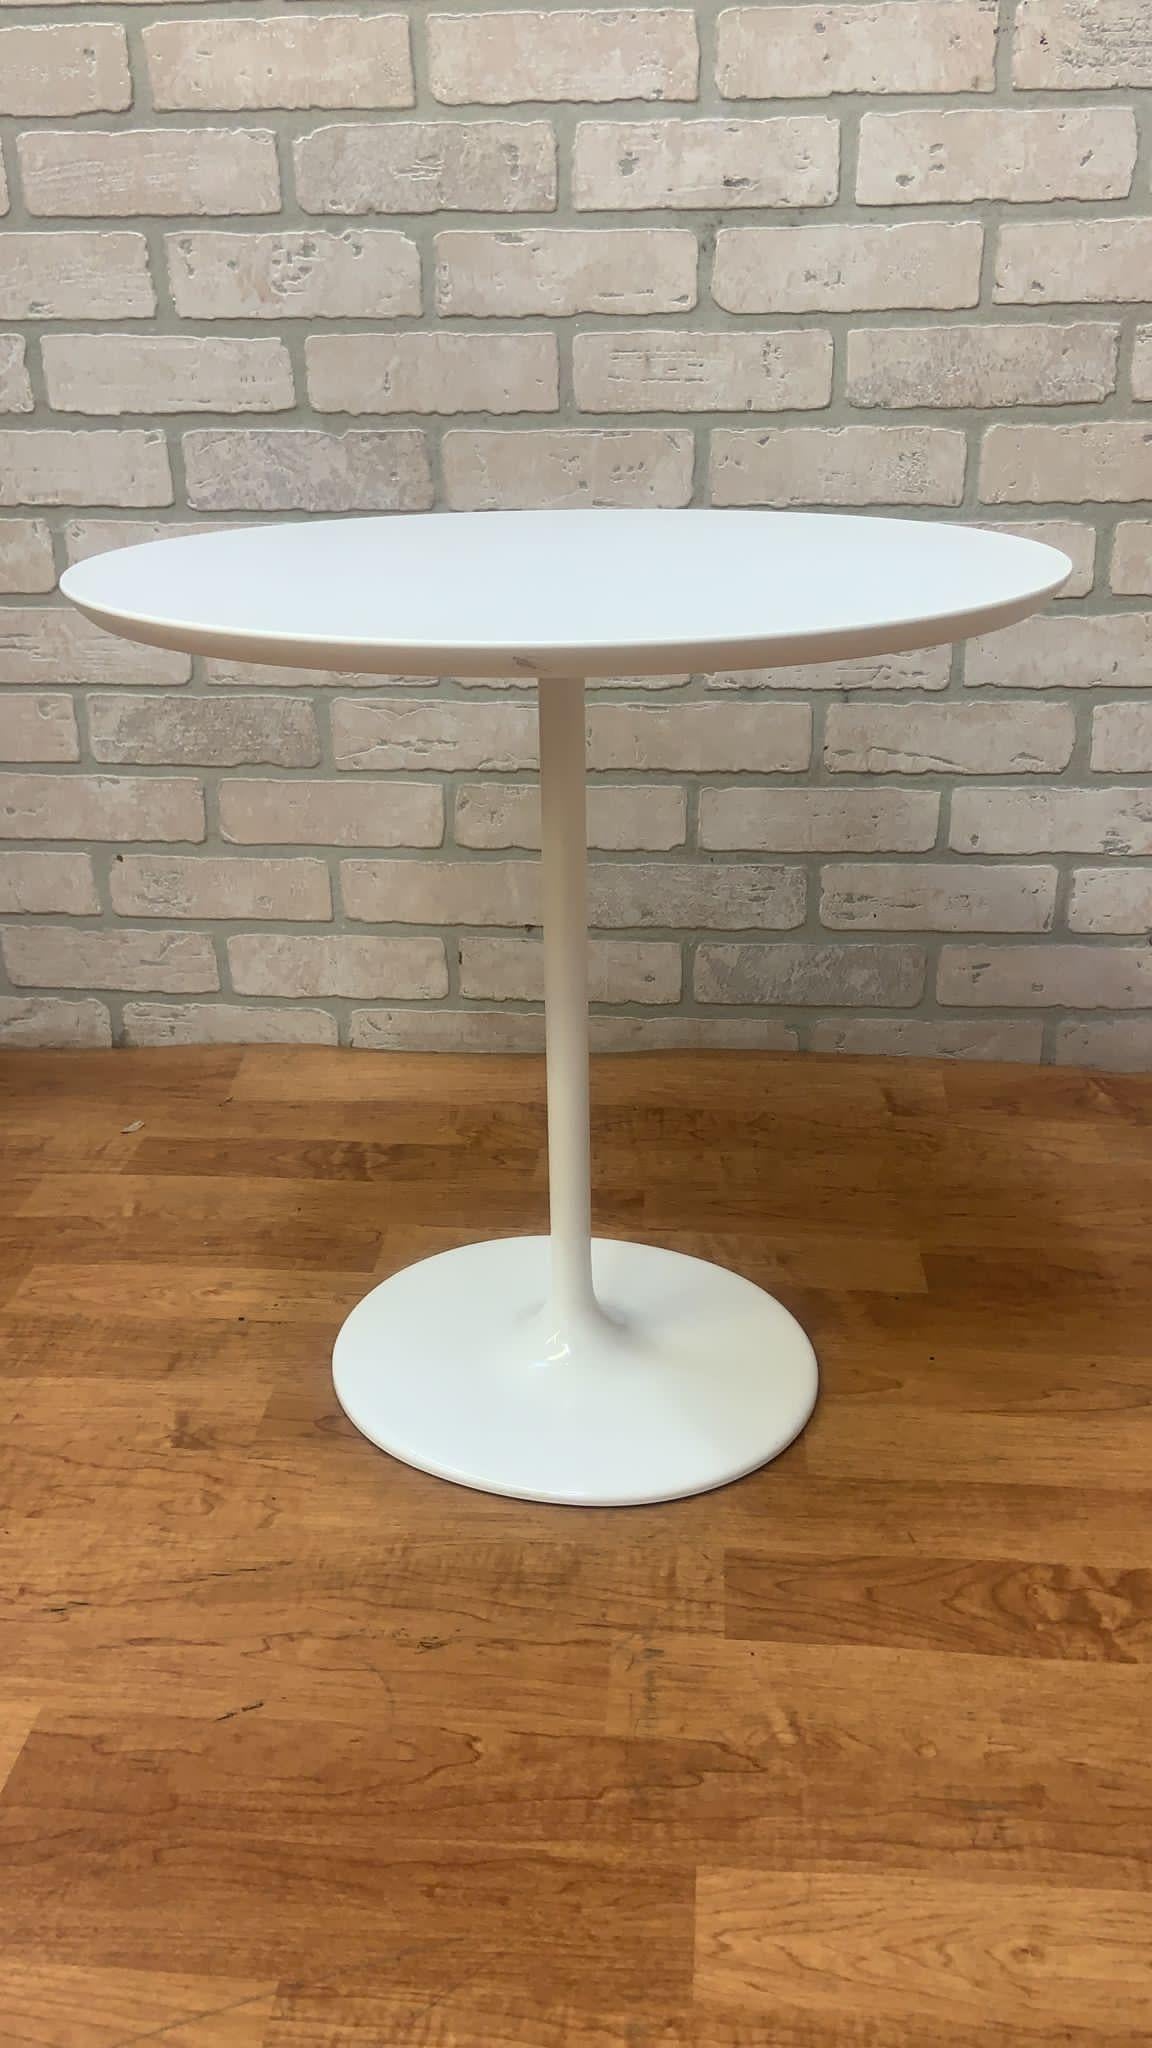 Italian Post Modern Dizzie White Oval Base Side Table by Lievore Altherr Molina for Arpe For Sale